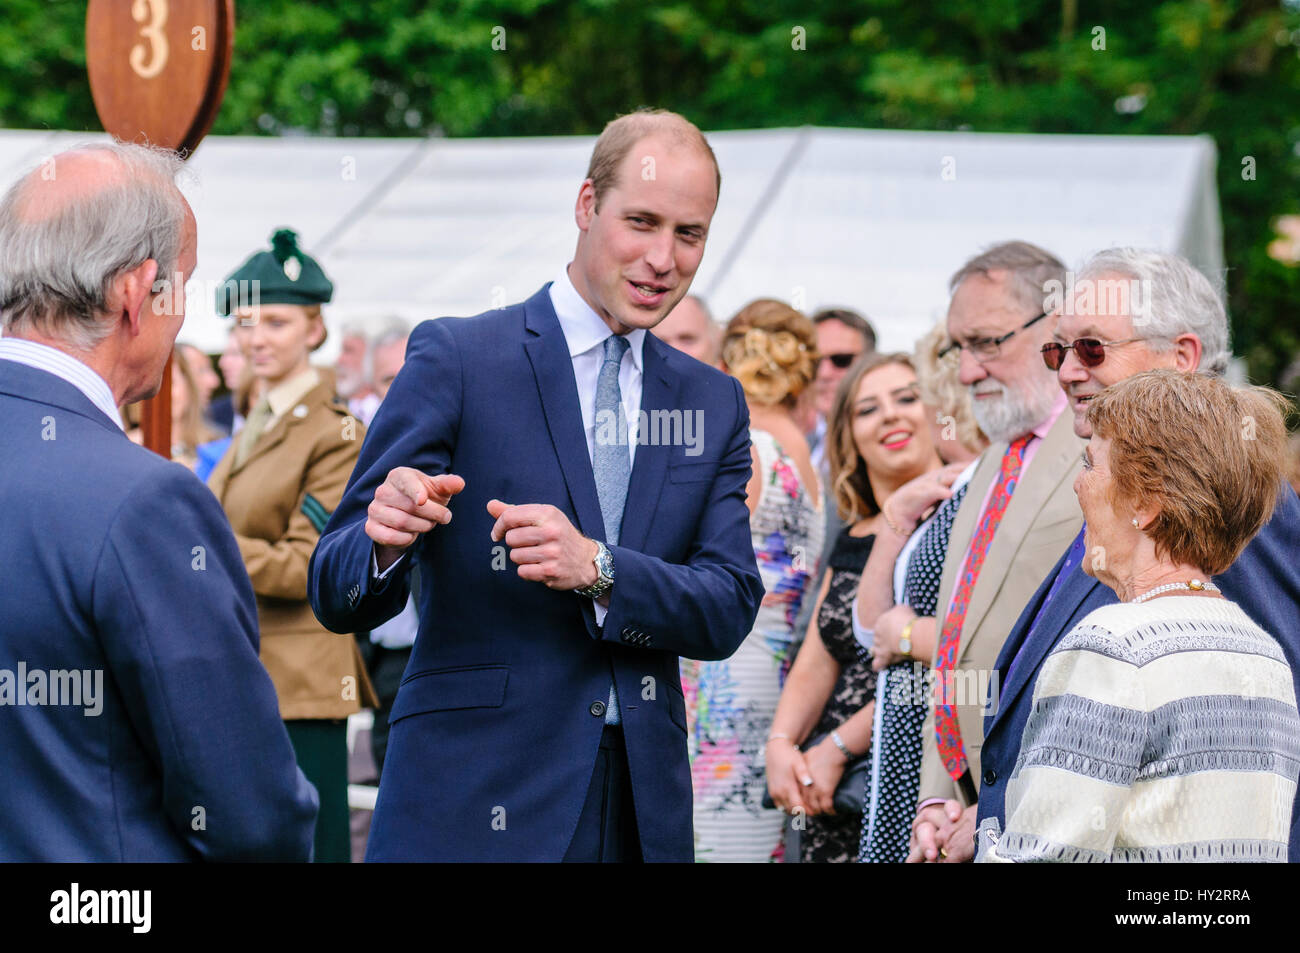 HILLSBOROUGH, NORTHERN IRELAND. 14 JUN 2016: Prince Williiam, The Duke Cambridge chats to guests at the Secretary of State's annual garden party. Stock Photo